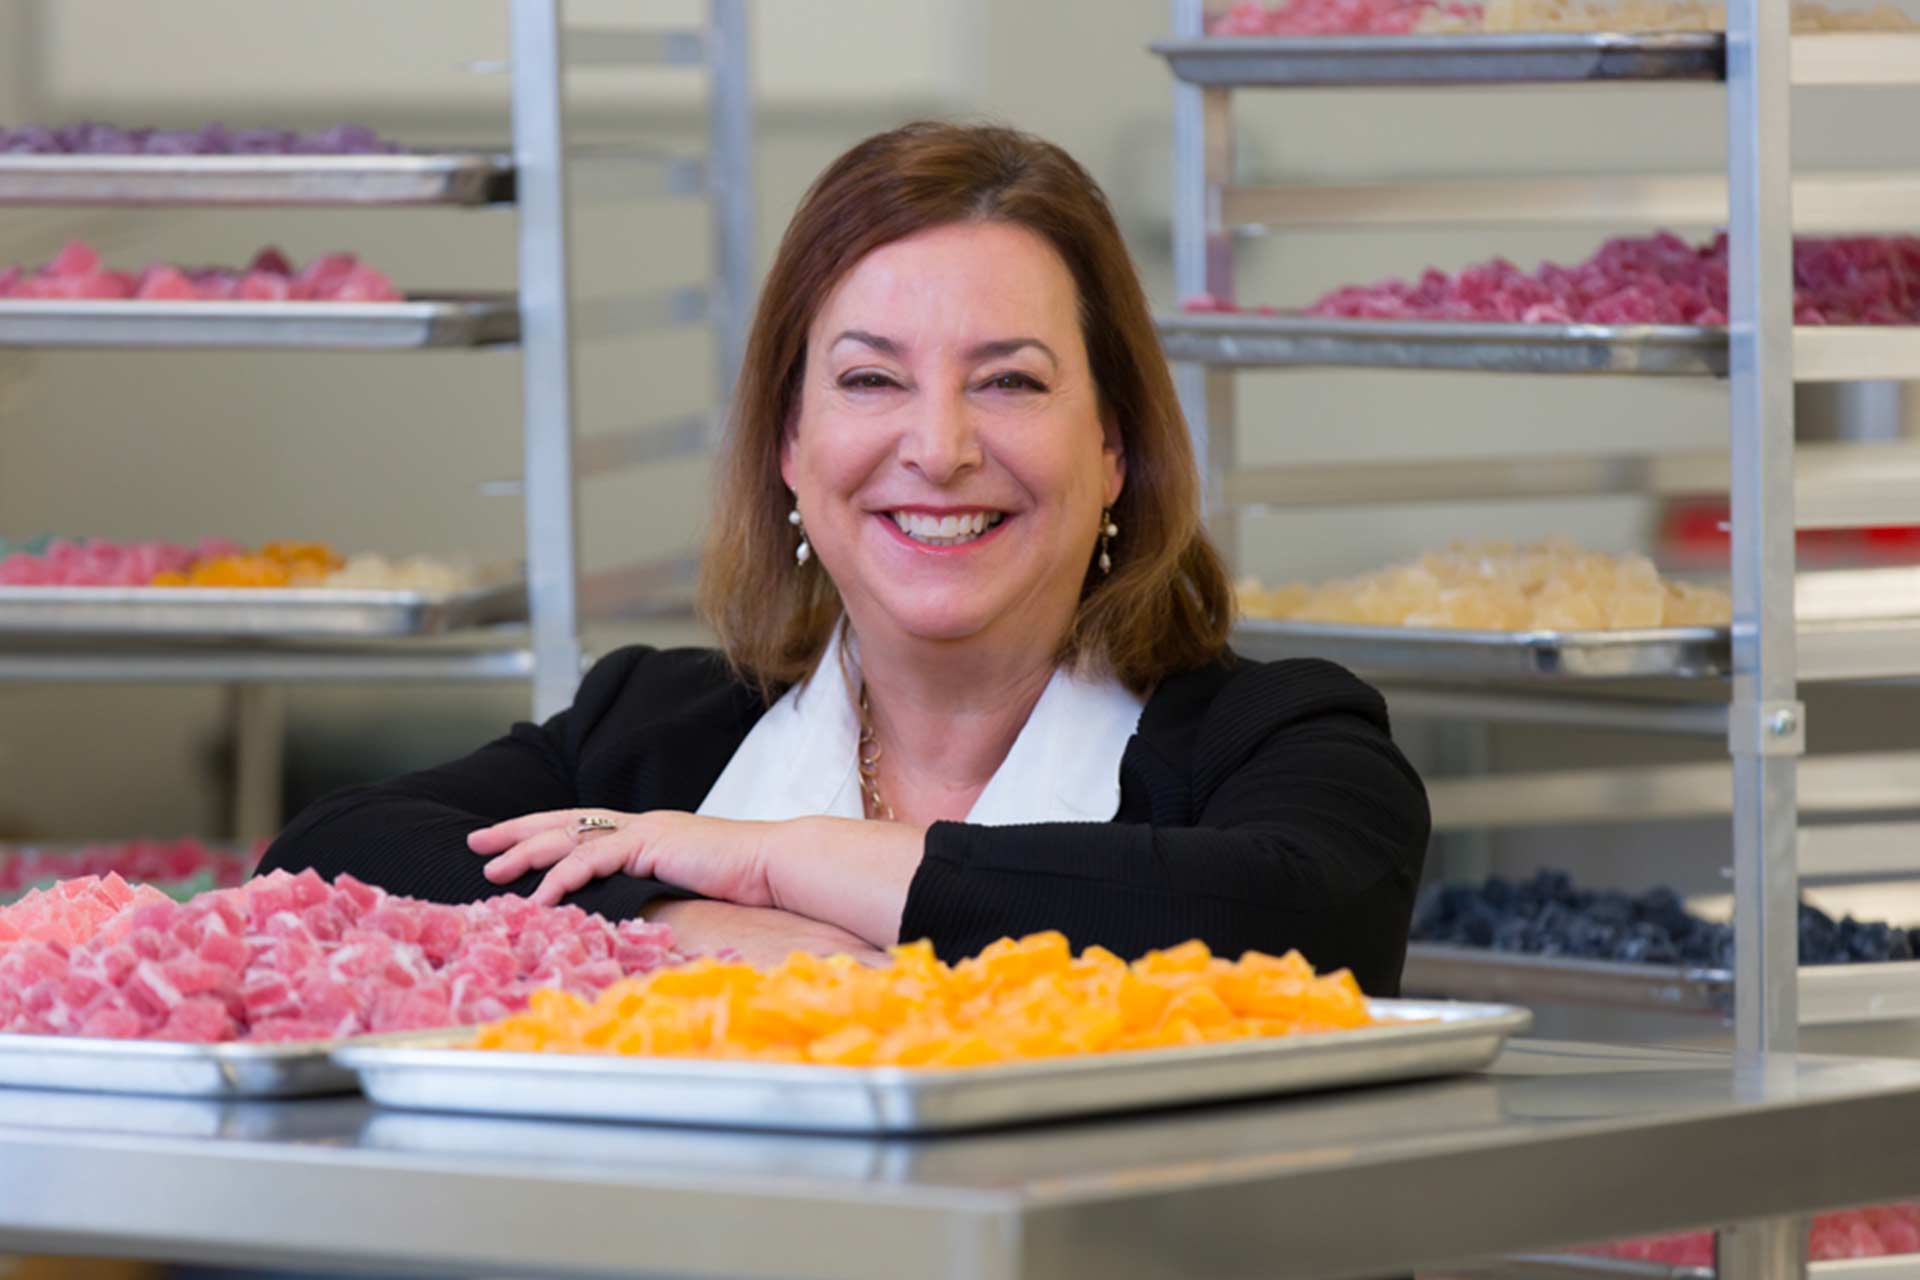 Nancy standing smiling in Wana Brands production facility, with trays of cannabis gummies on the table in front of her.